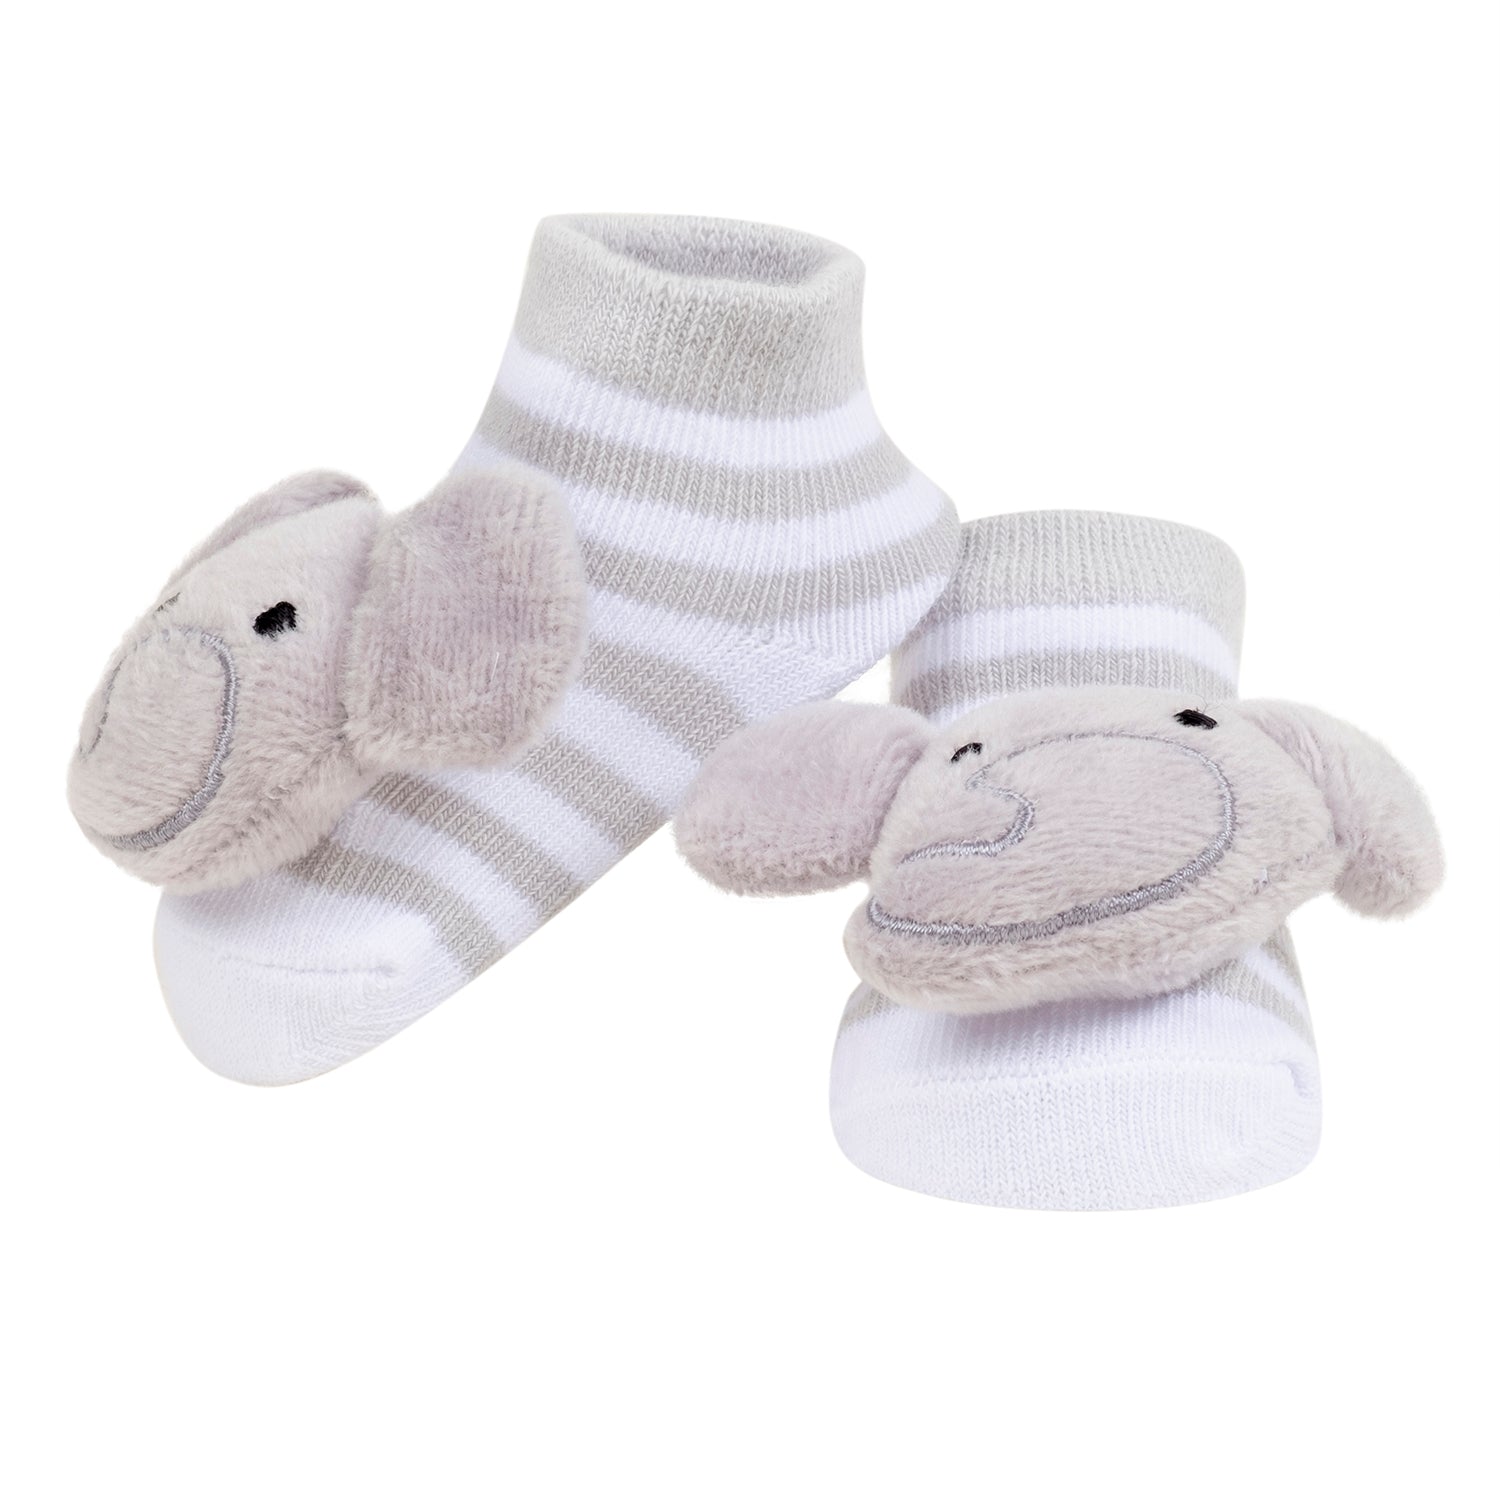 Baby Moo 3D Lion Elephant Cotton Ankle Length Fancy Infant Gift Set of 2 Socks Booties - Grey, Peach